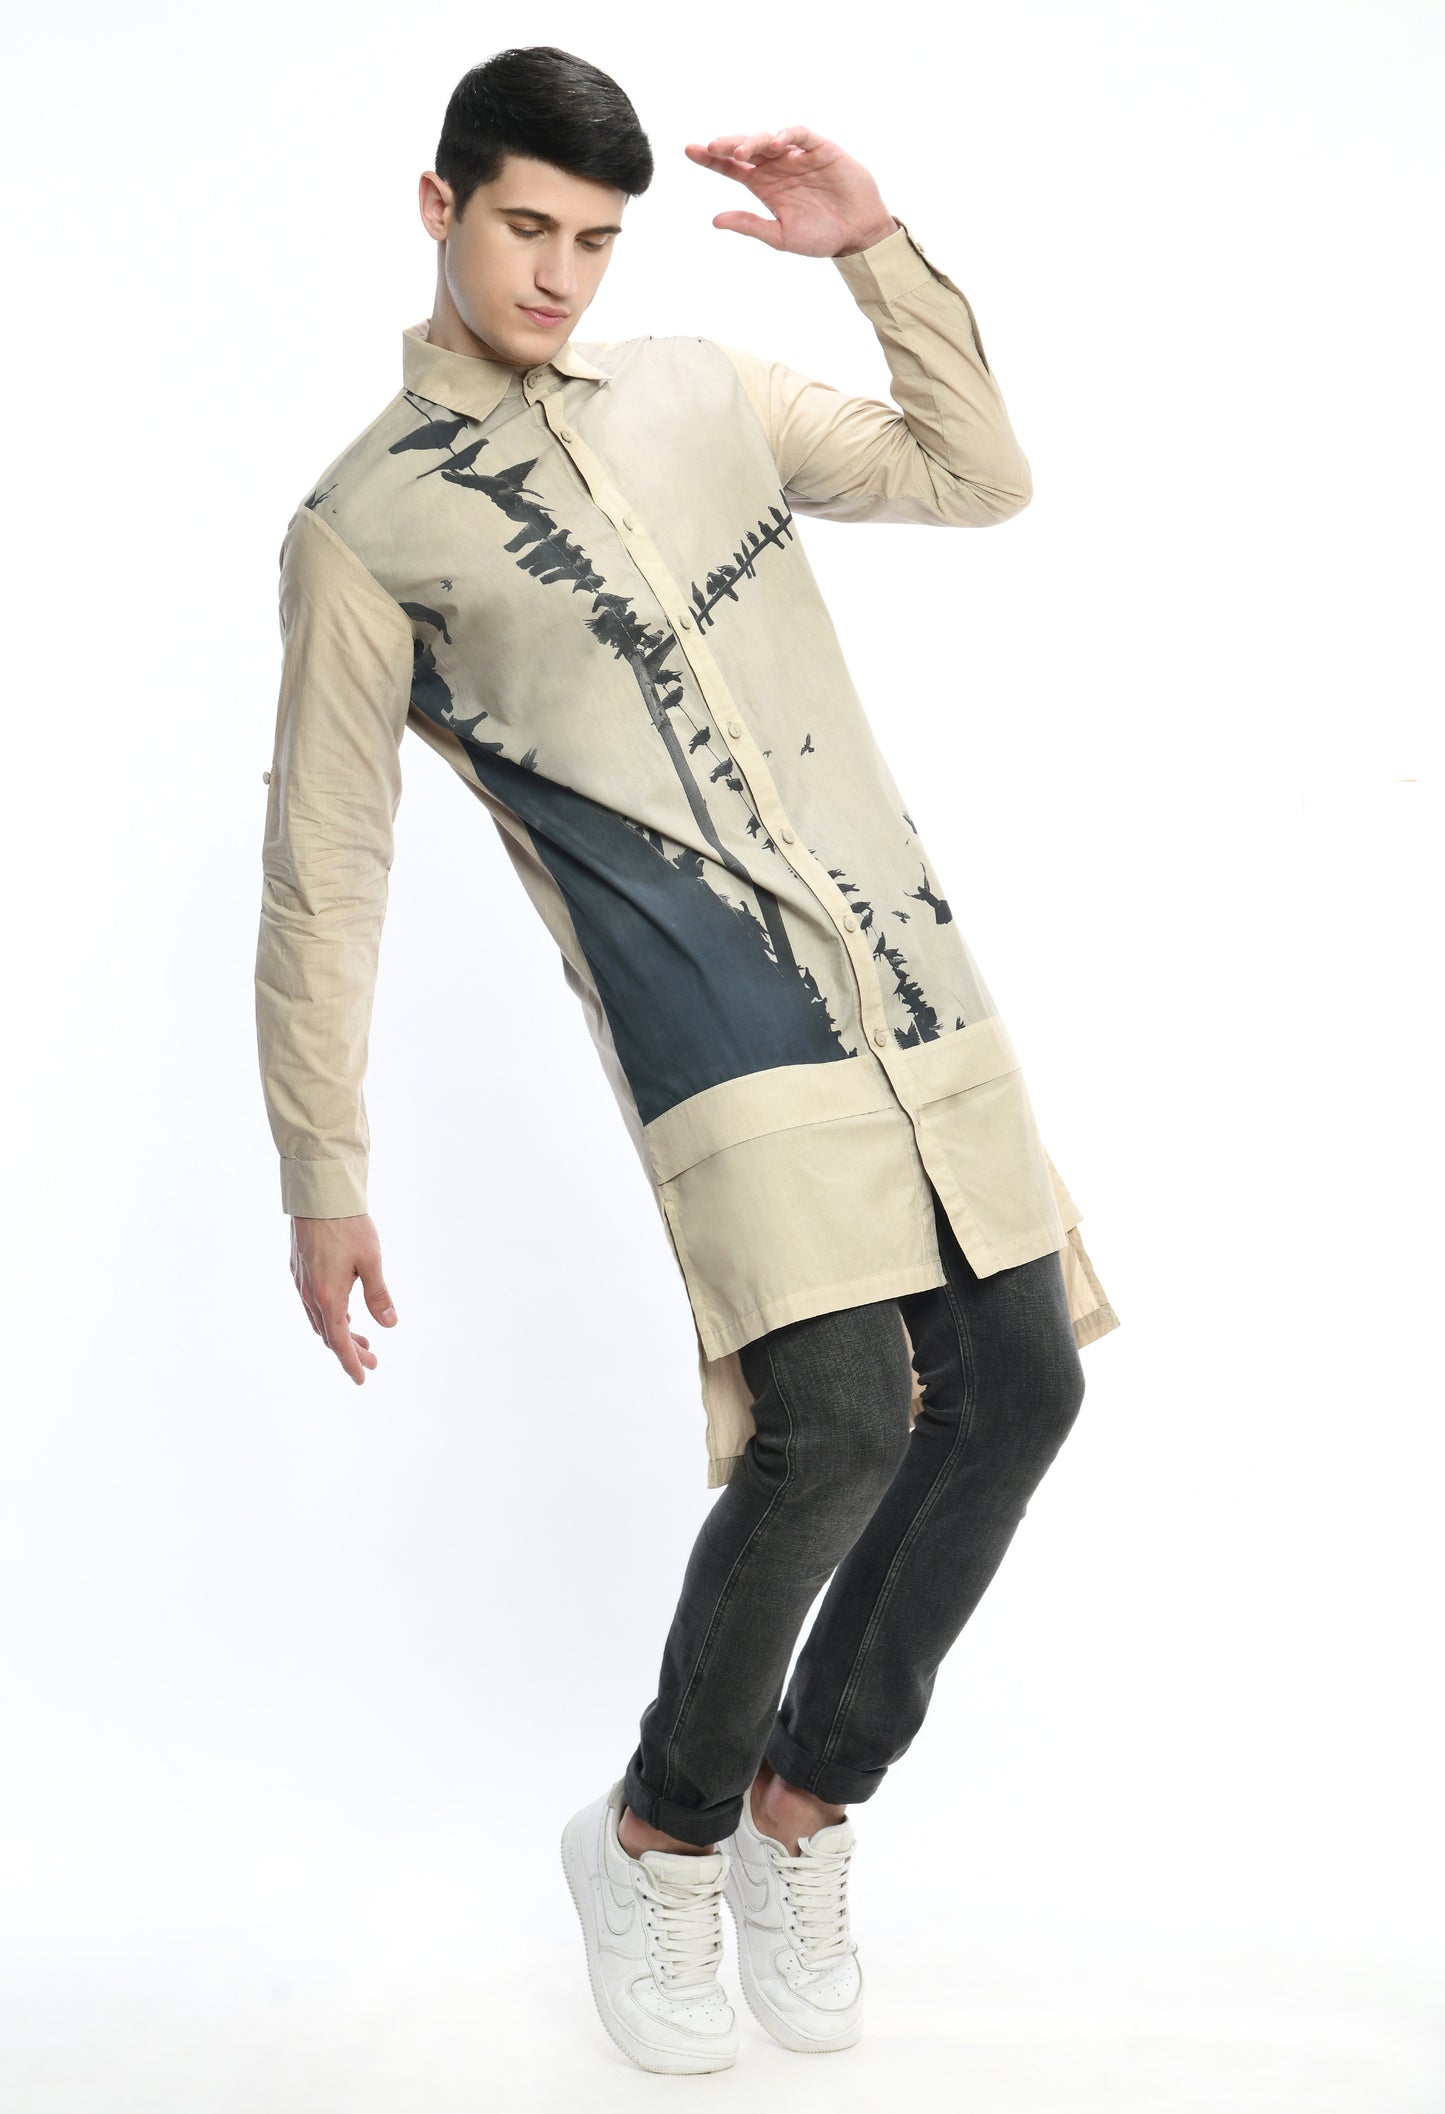 Beige high low, stylish cotton shirt with digital print on it